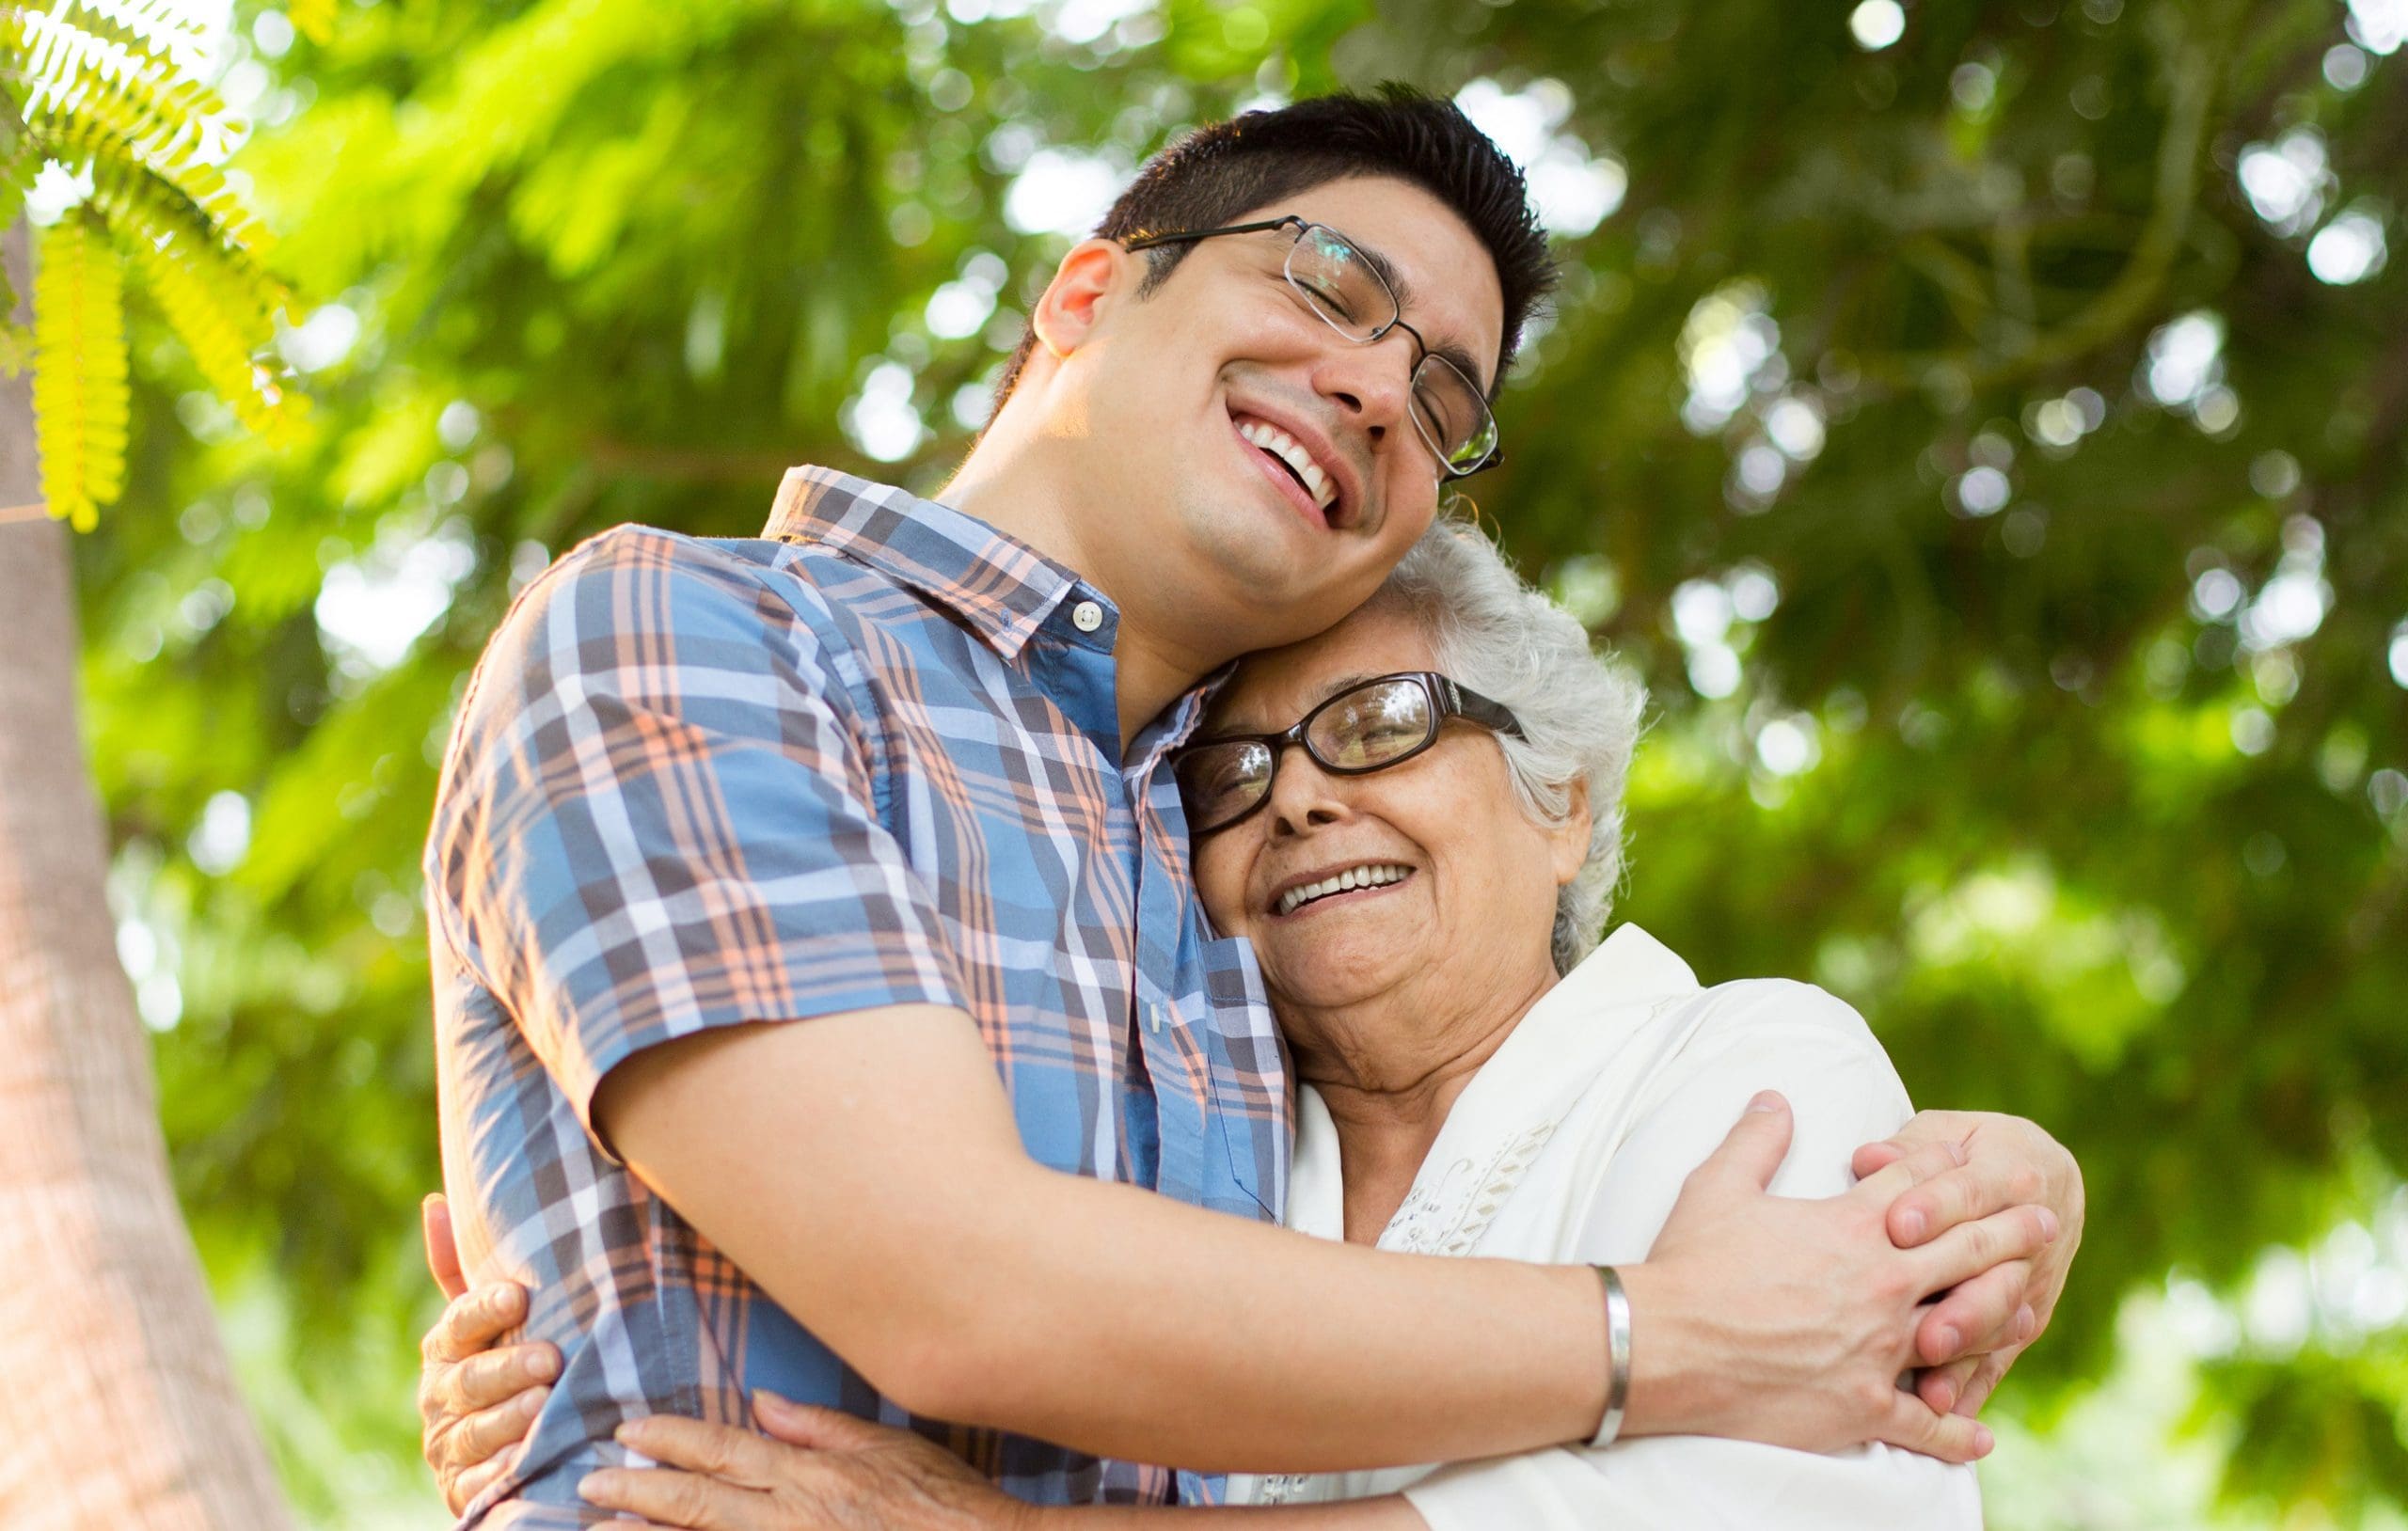 A latin senior woman and her grandson embracing and smiling with eyes closed in a vertical medium shot outdoor